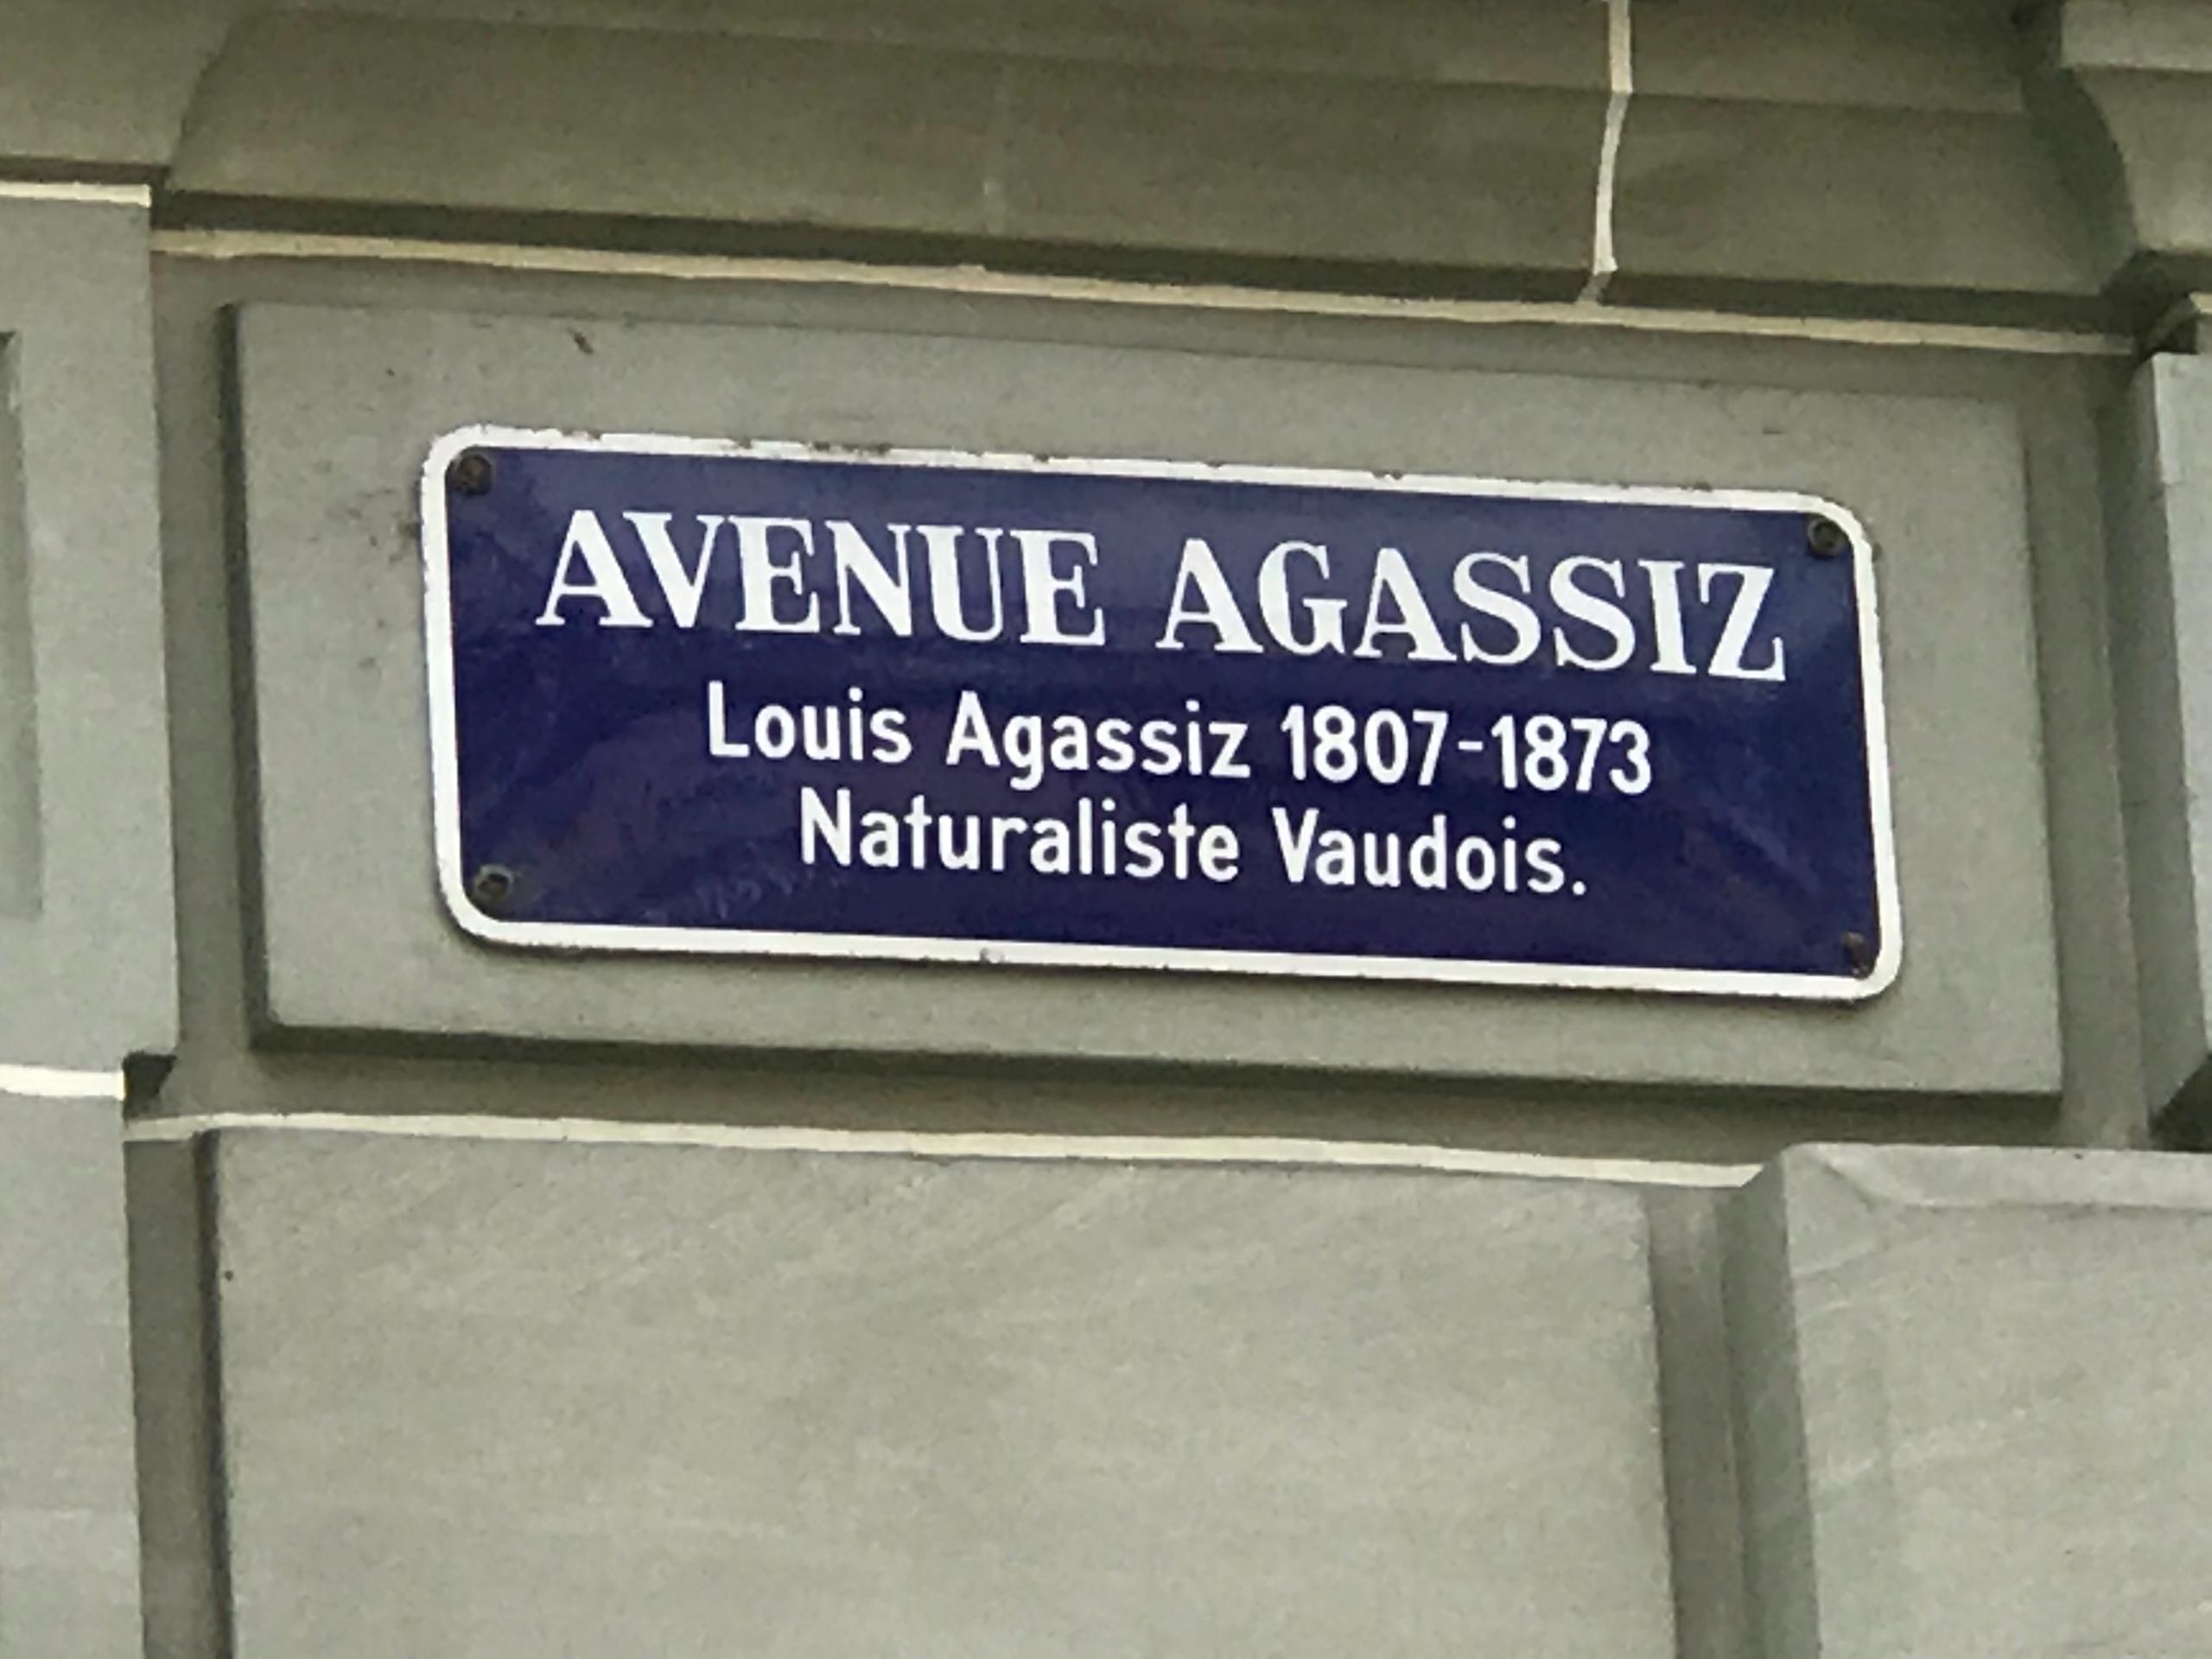 Avenue Agassiz street sign in Lausanne